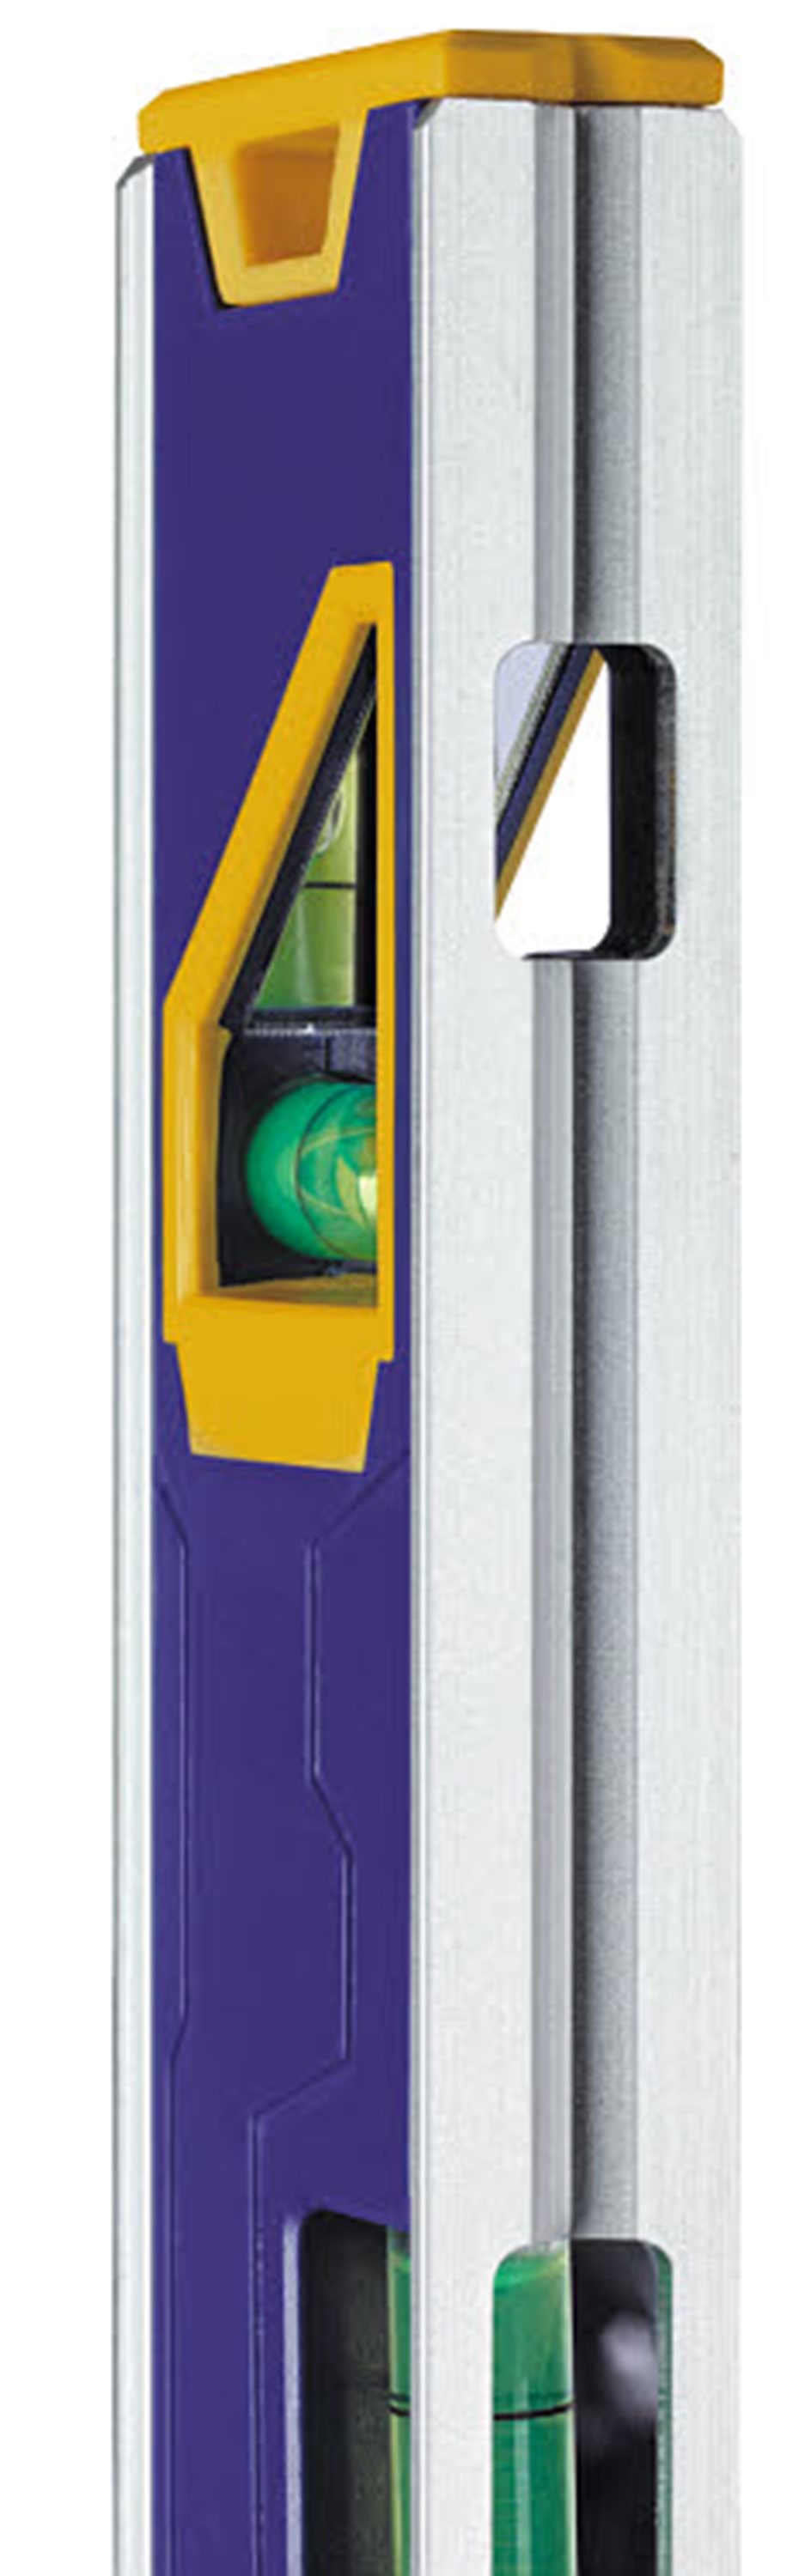 IRWIN Tools 150t Magnetic Toolbox Level 12-inch 1794157 for sale online 